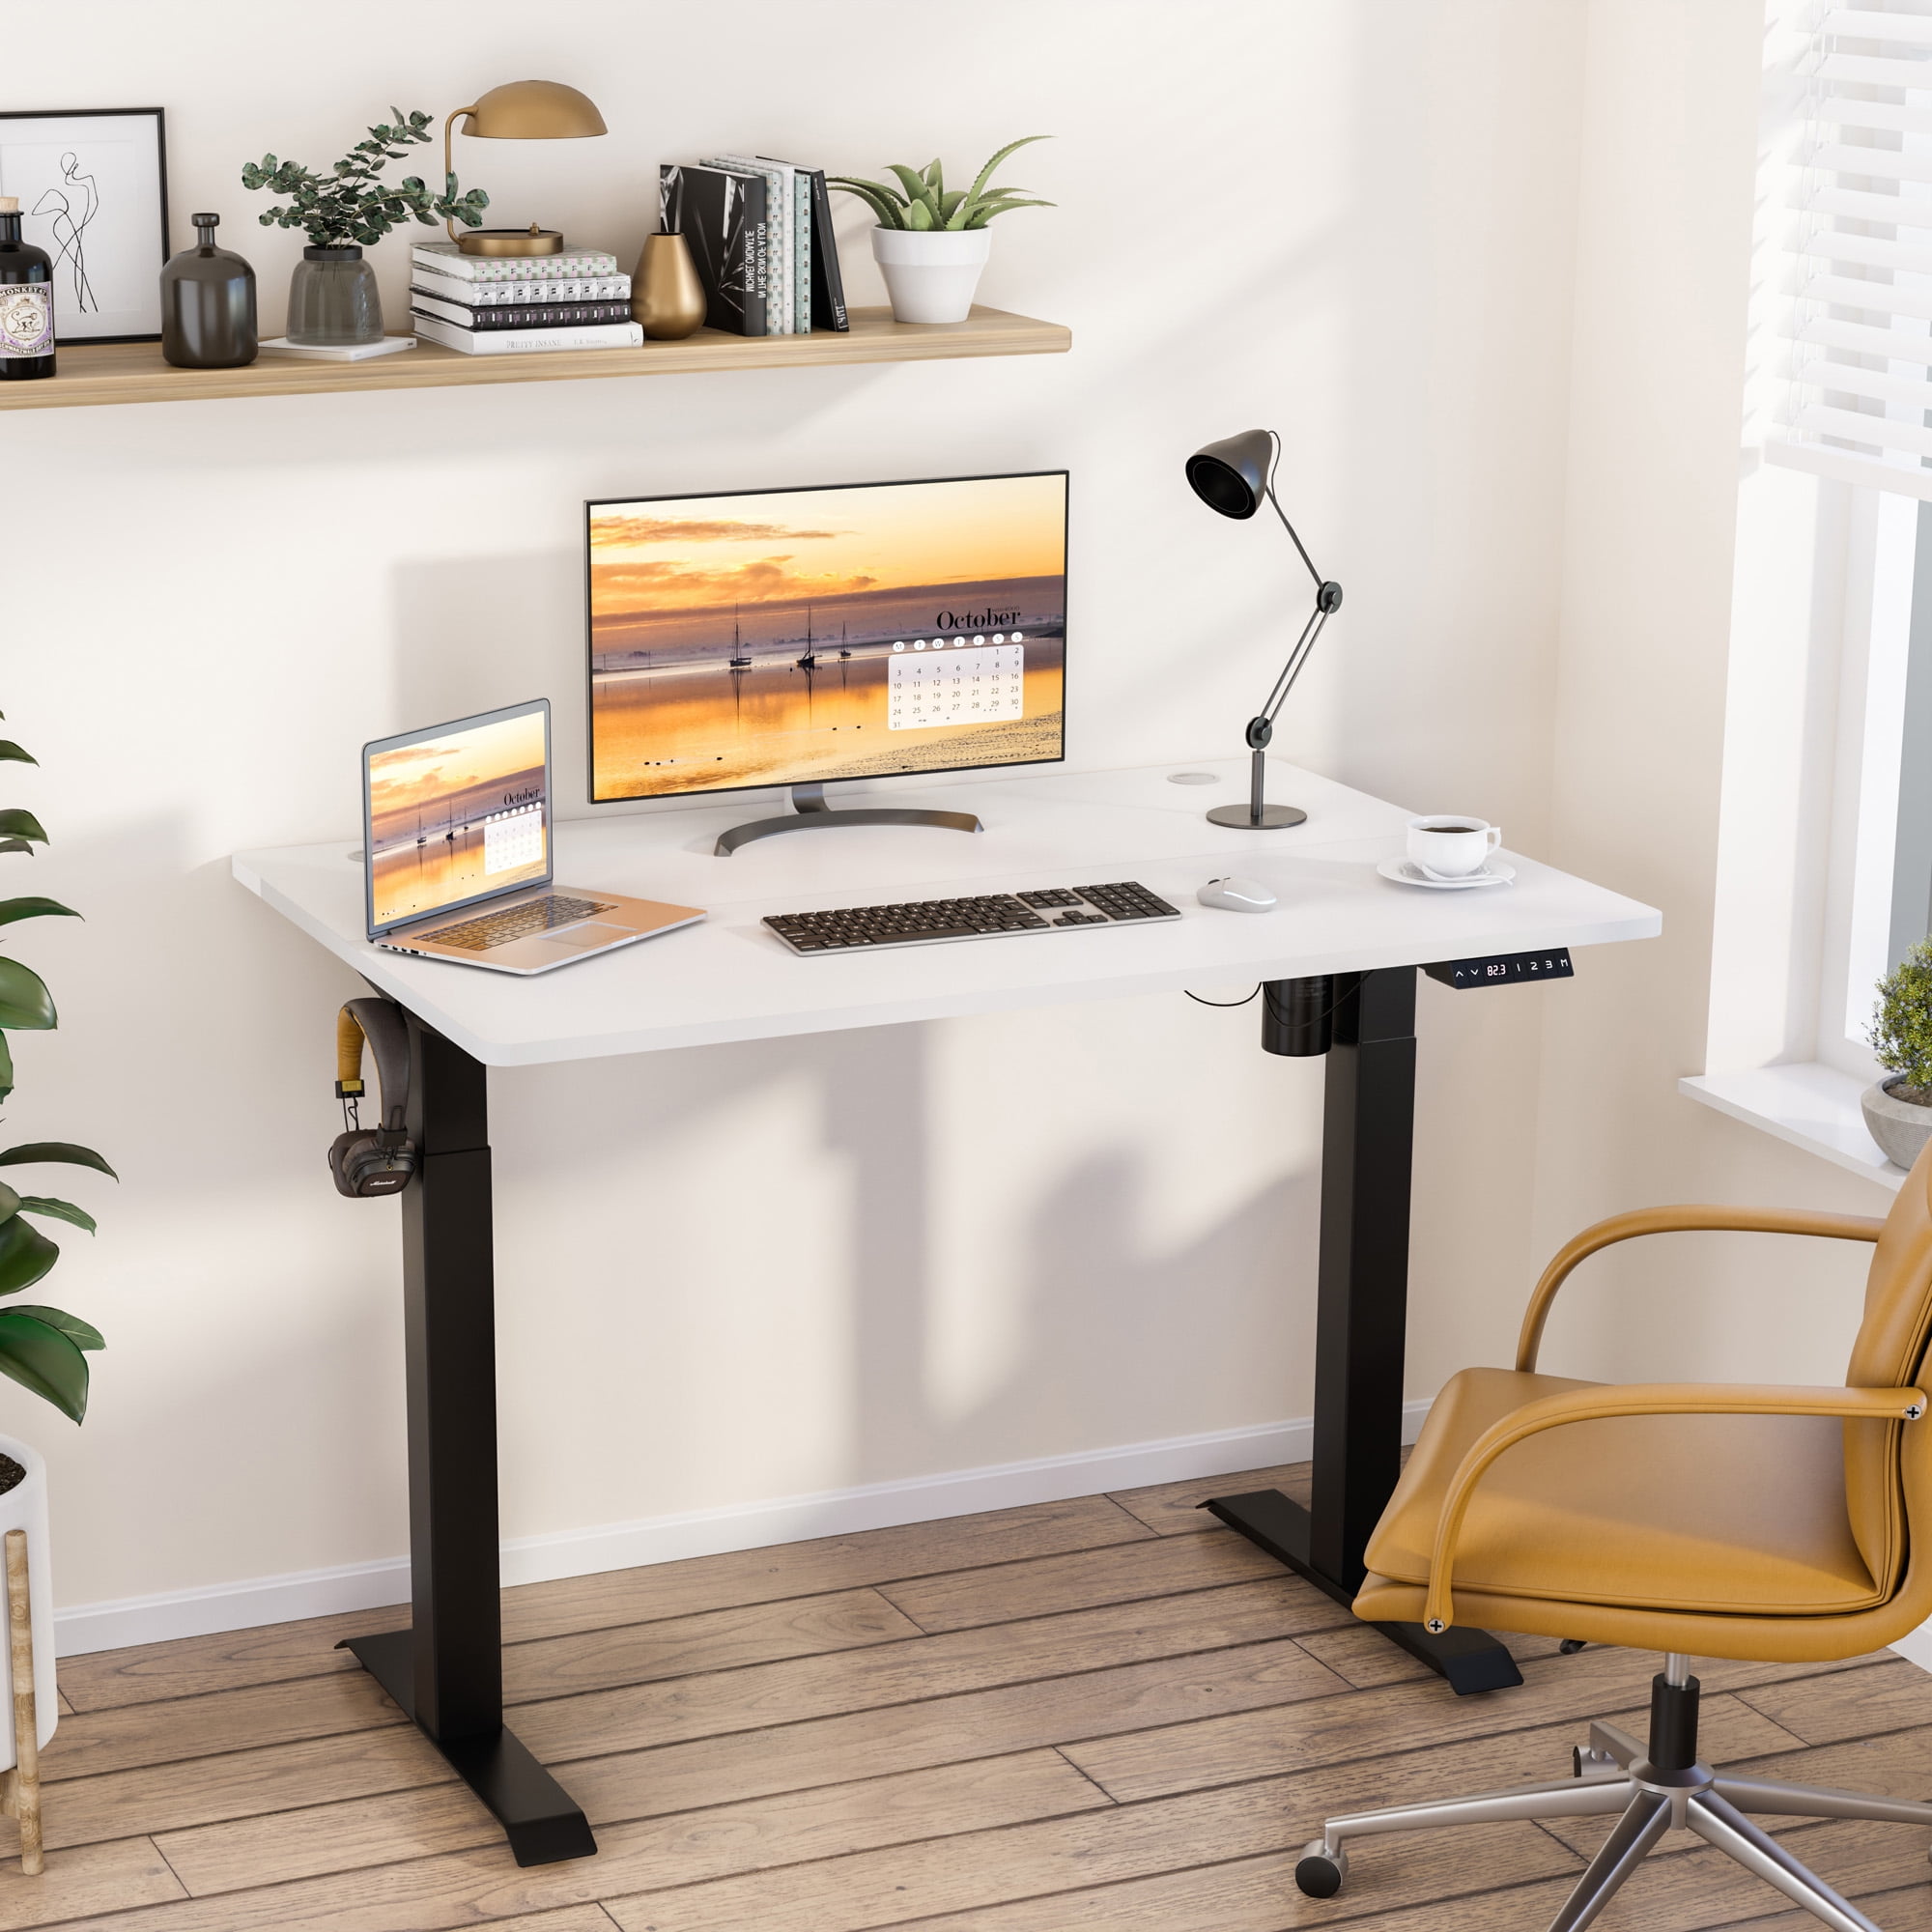 Black Eureka Ergonomic Electric Standing Desk 48 x 24 Inches Height Adjustable Sit Stand Desk Home Office Dual Motor Computer Workstation Solid Whole-Piece Desk Board